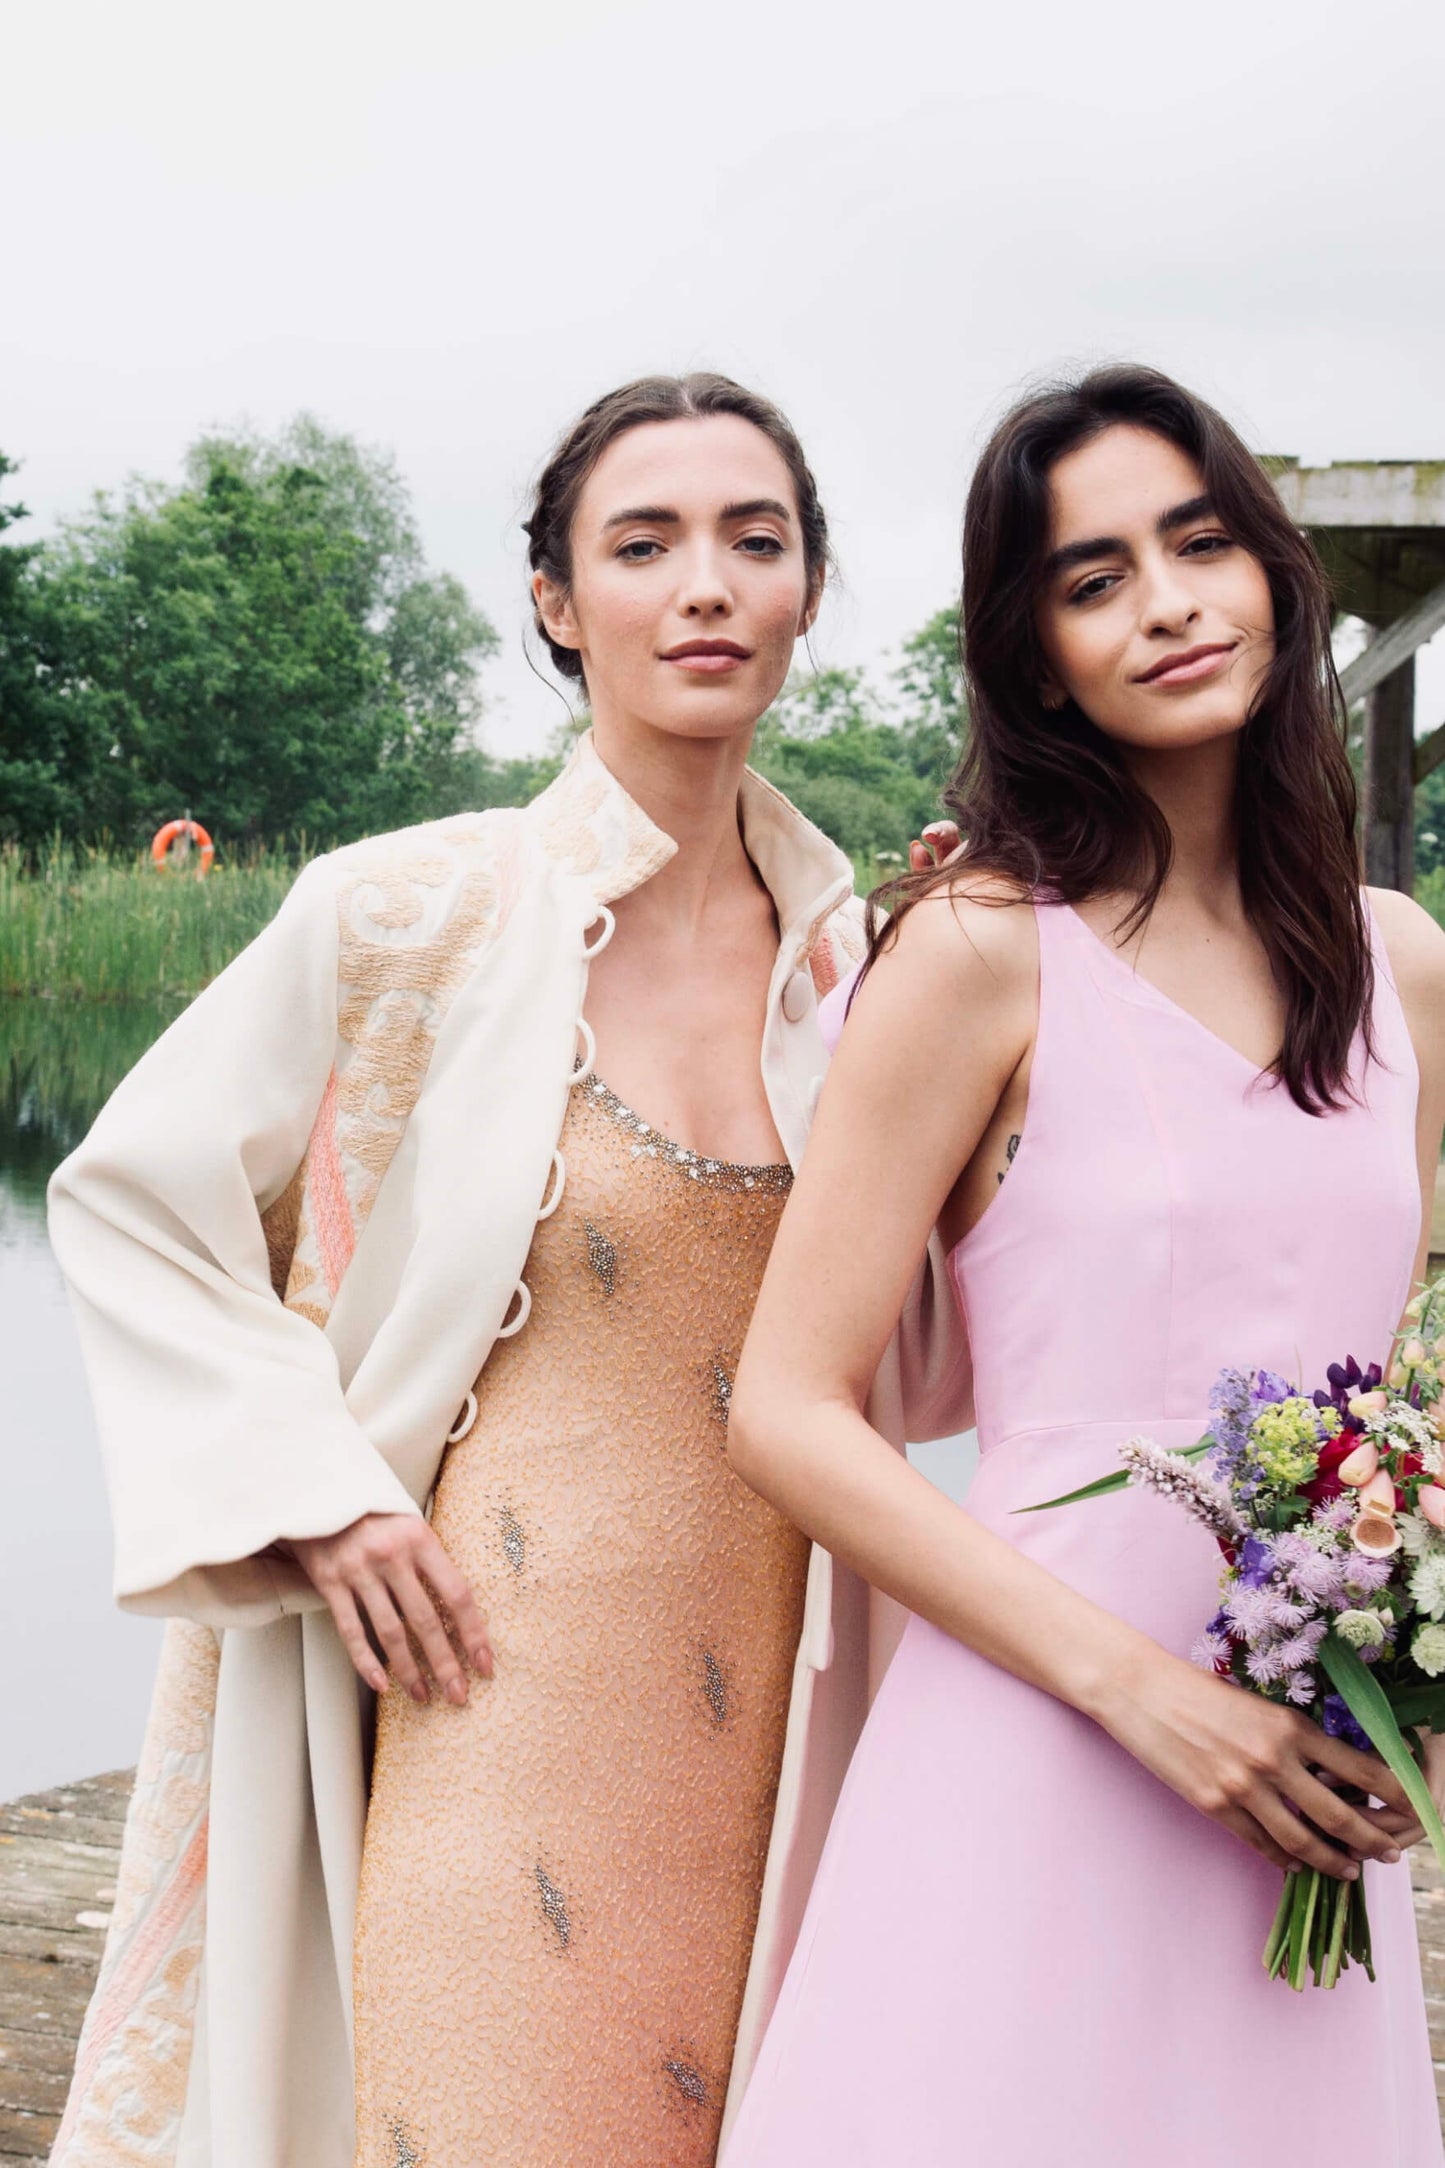 Salmon embroidered wedding gown and jacket and pink bridesmaid dress